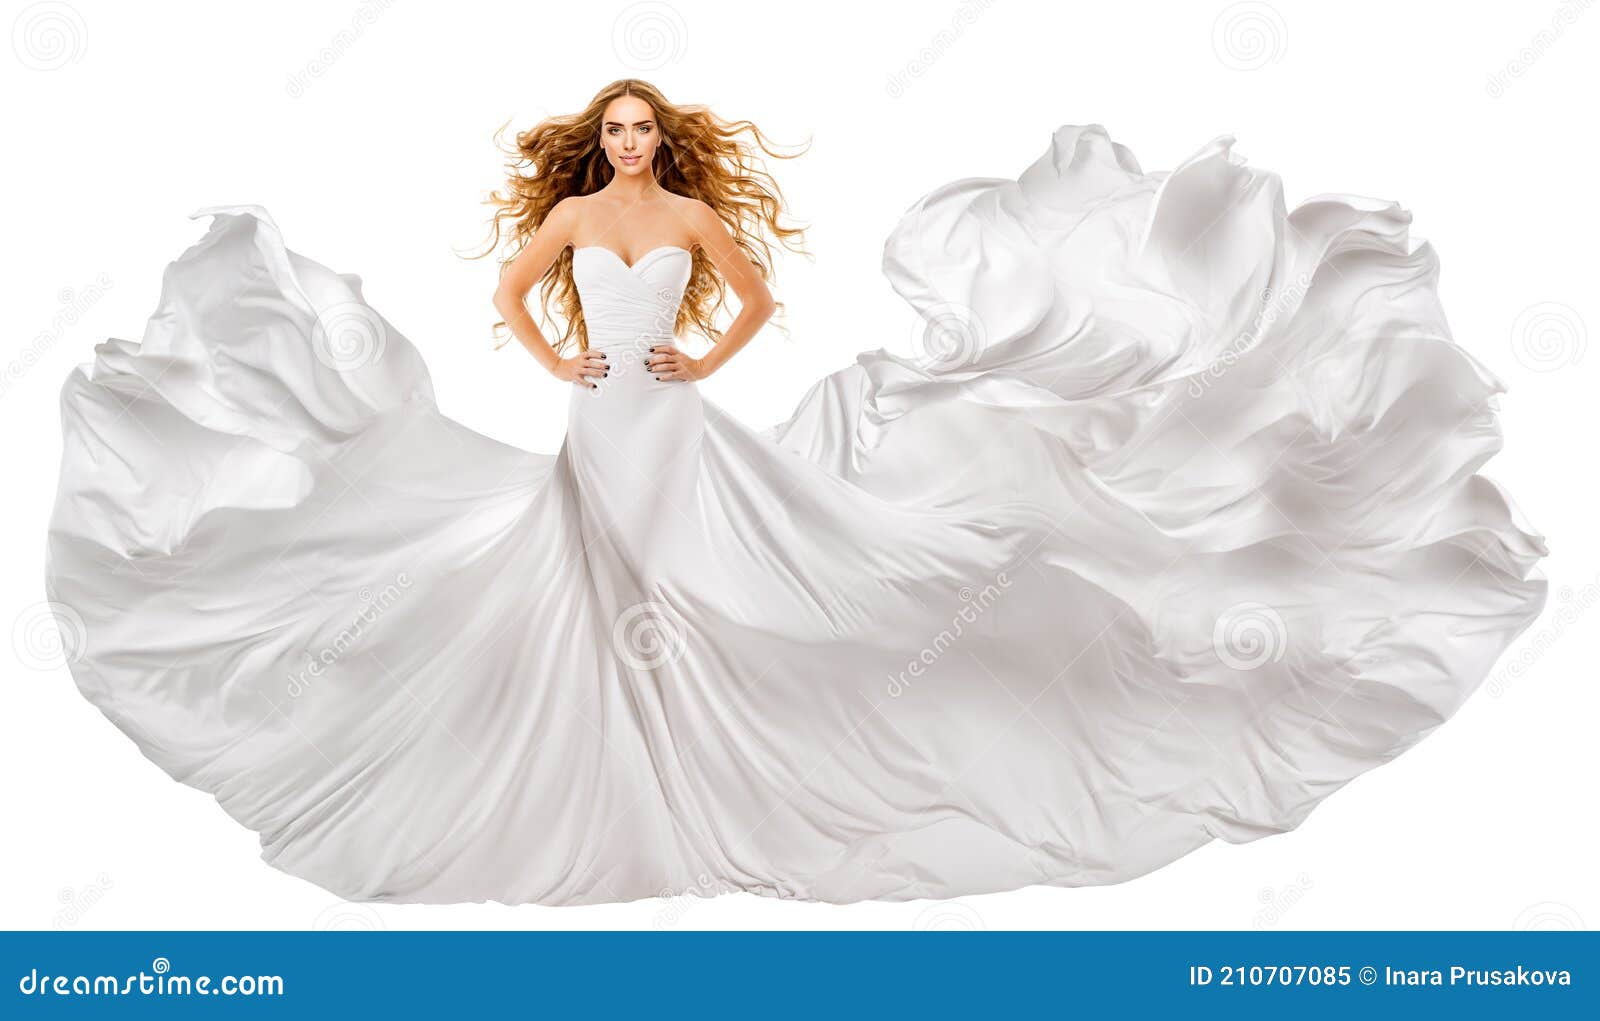 woman white long dress. red hair model in wedding gown. white silk fabric waving on wind. curly redhead flying hairstyle. 